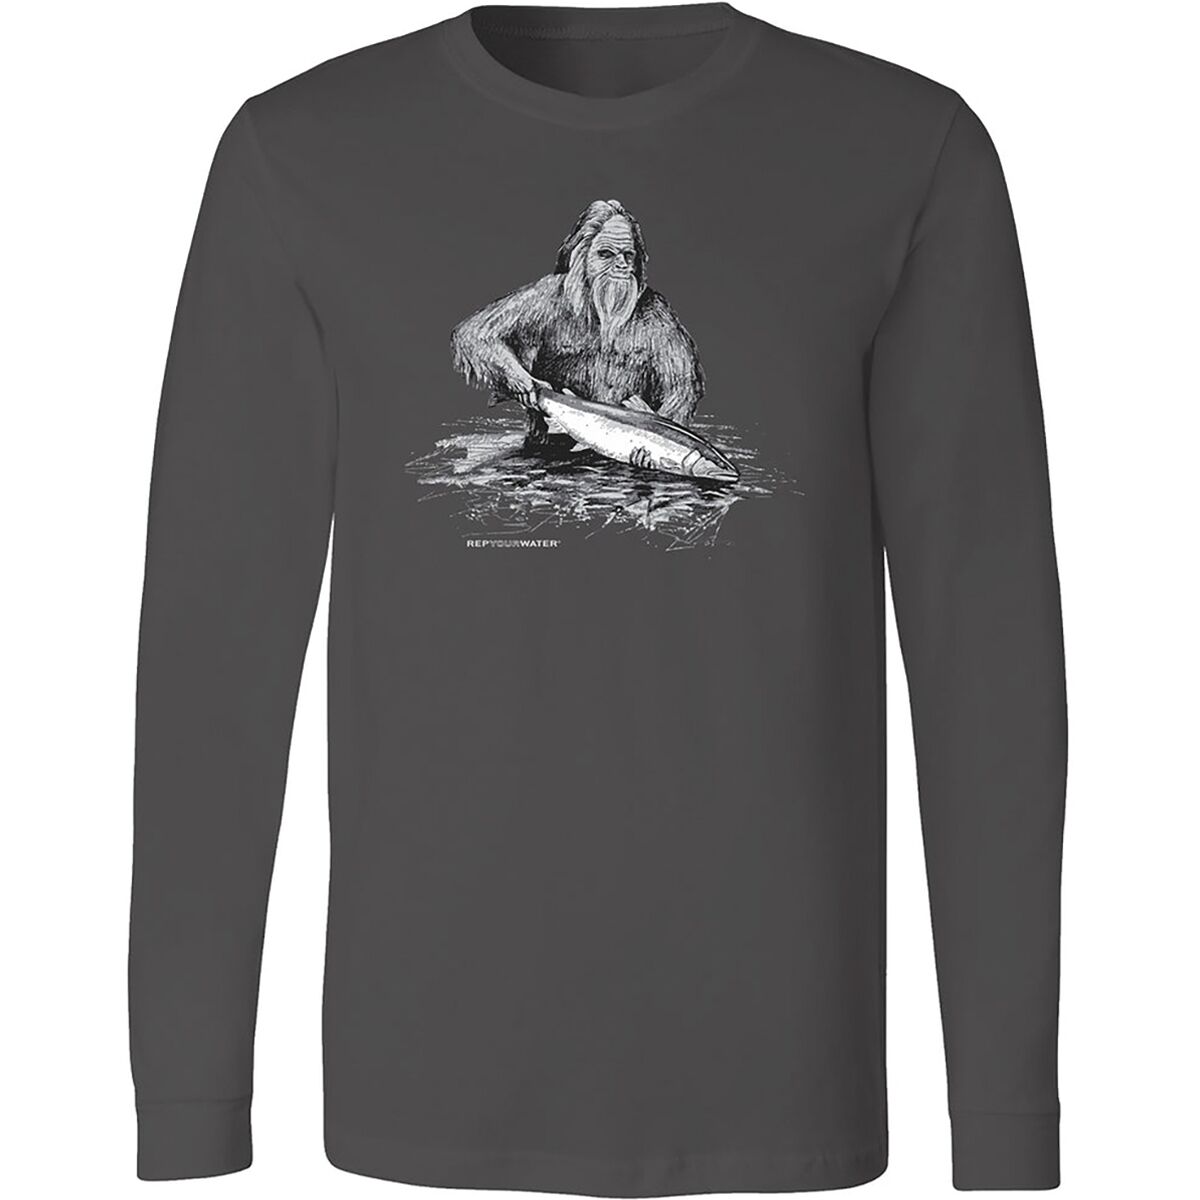 Rep Your Water Squatch and Release Long-Sleeve T-Shirt - Men's